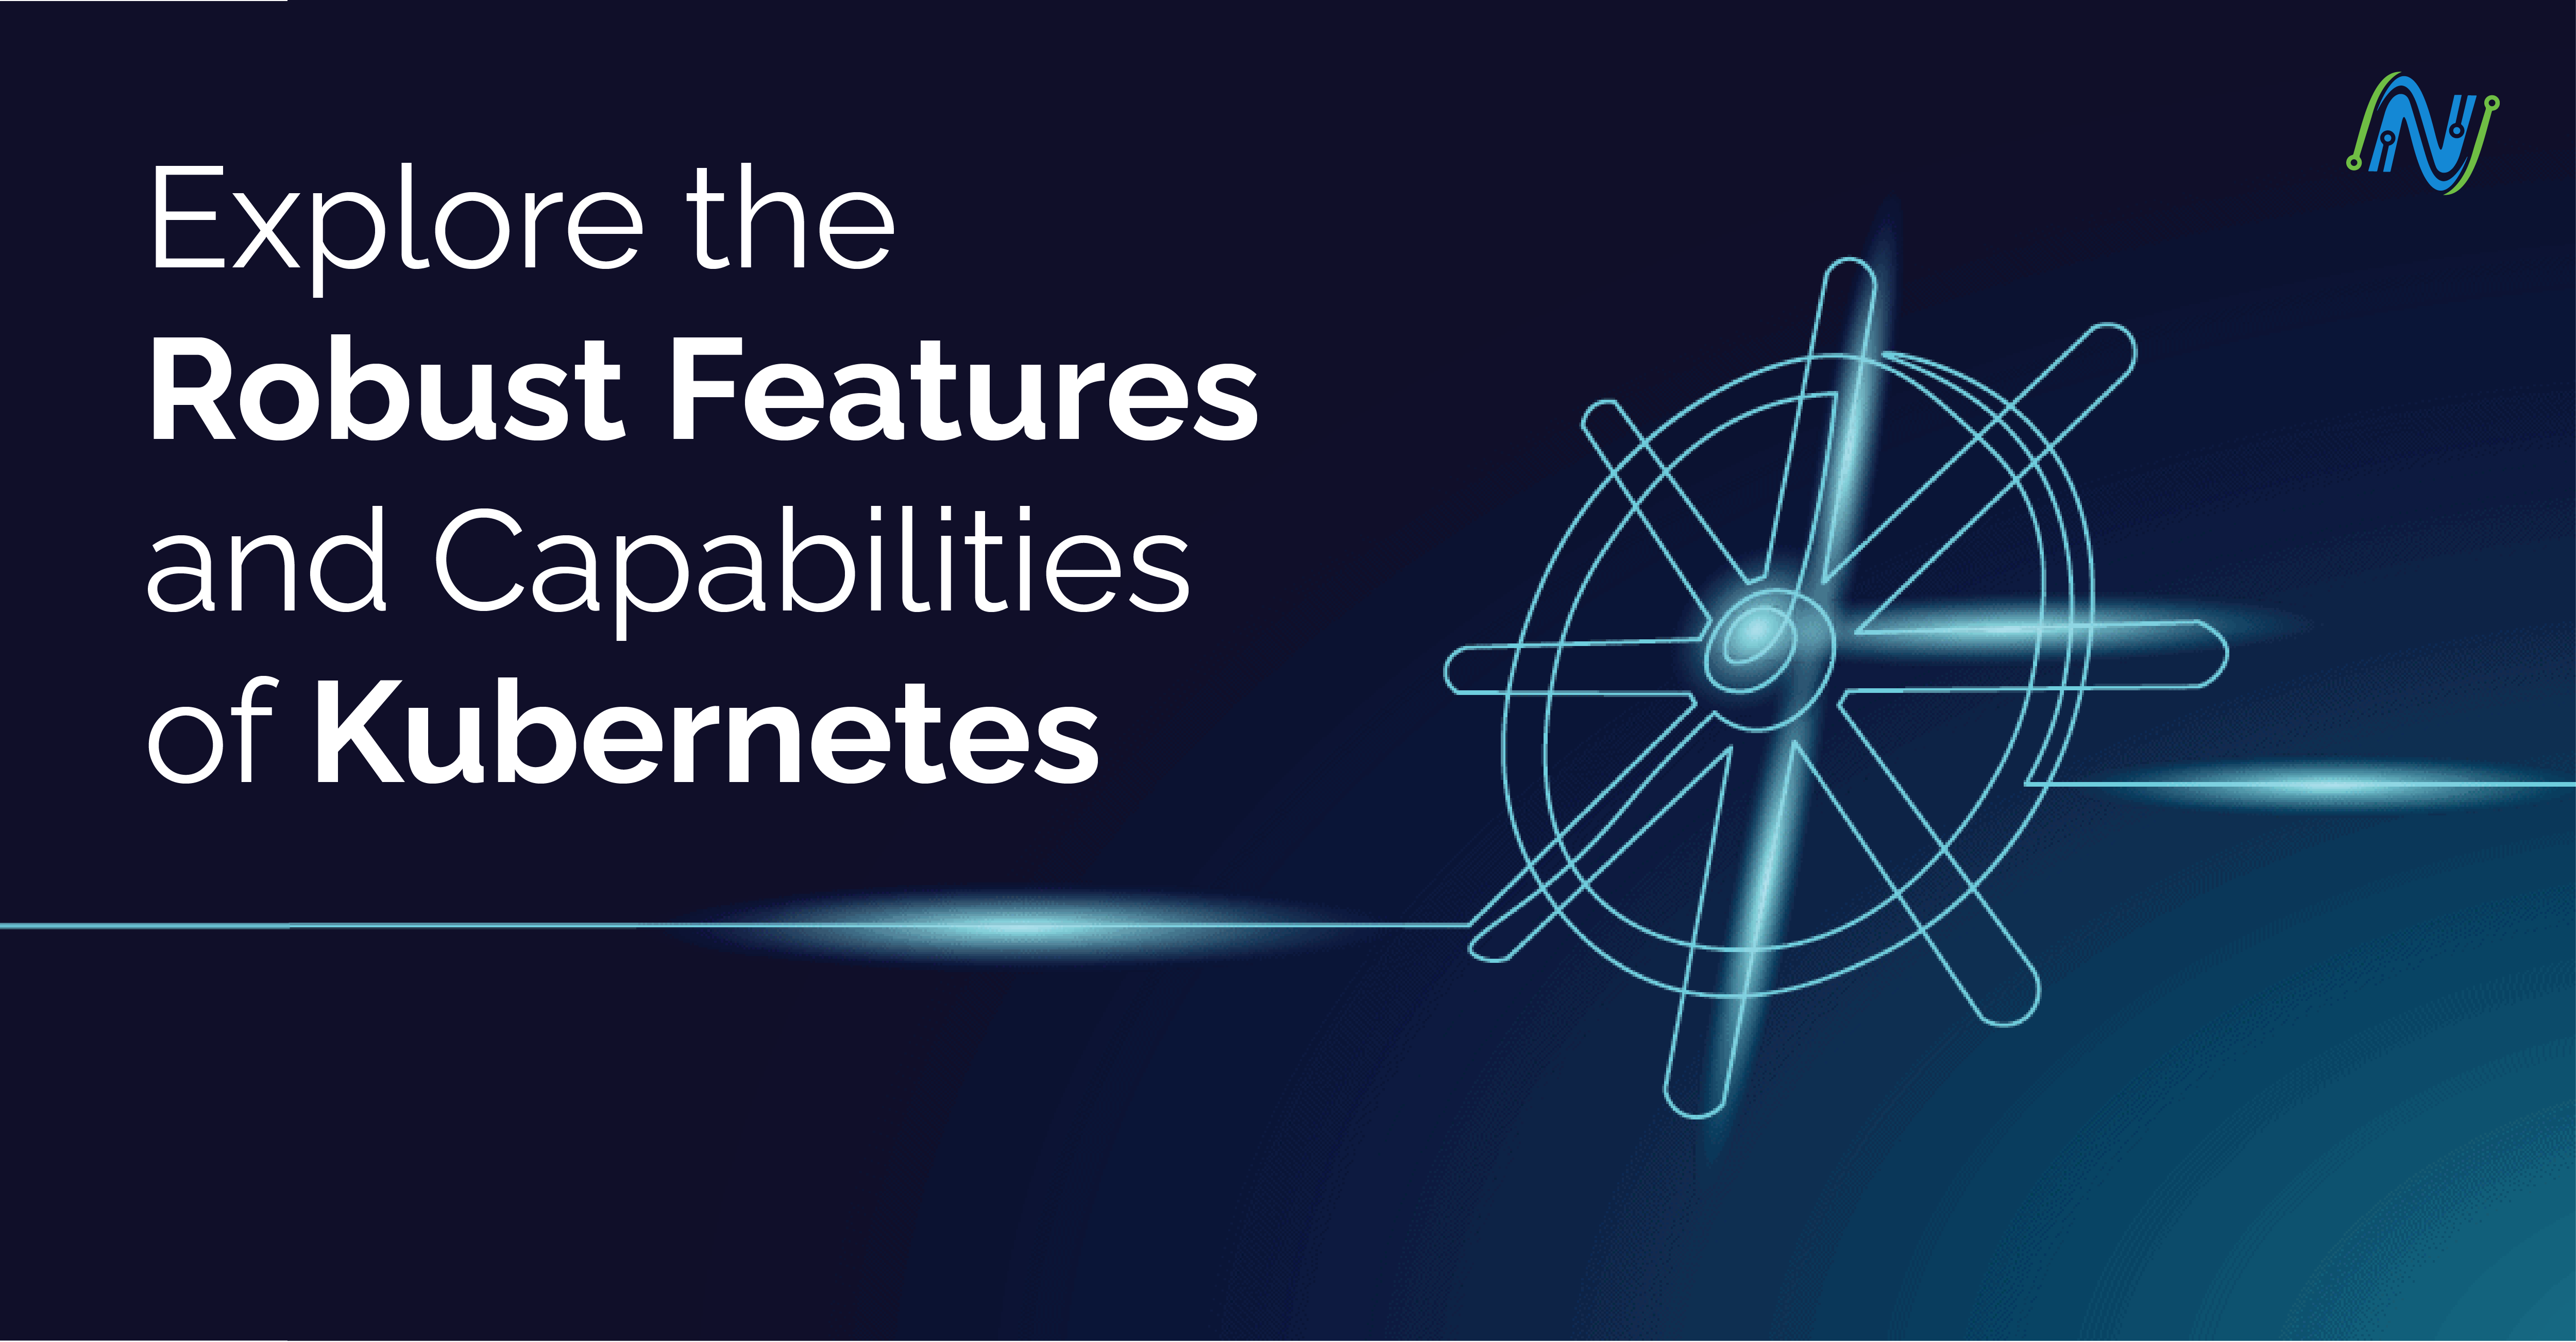 Explore the Robust Features and Capabilities of Kubernetes